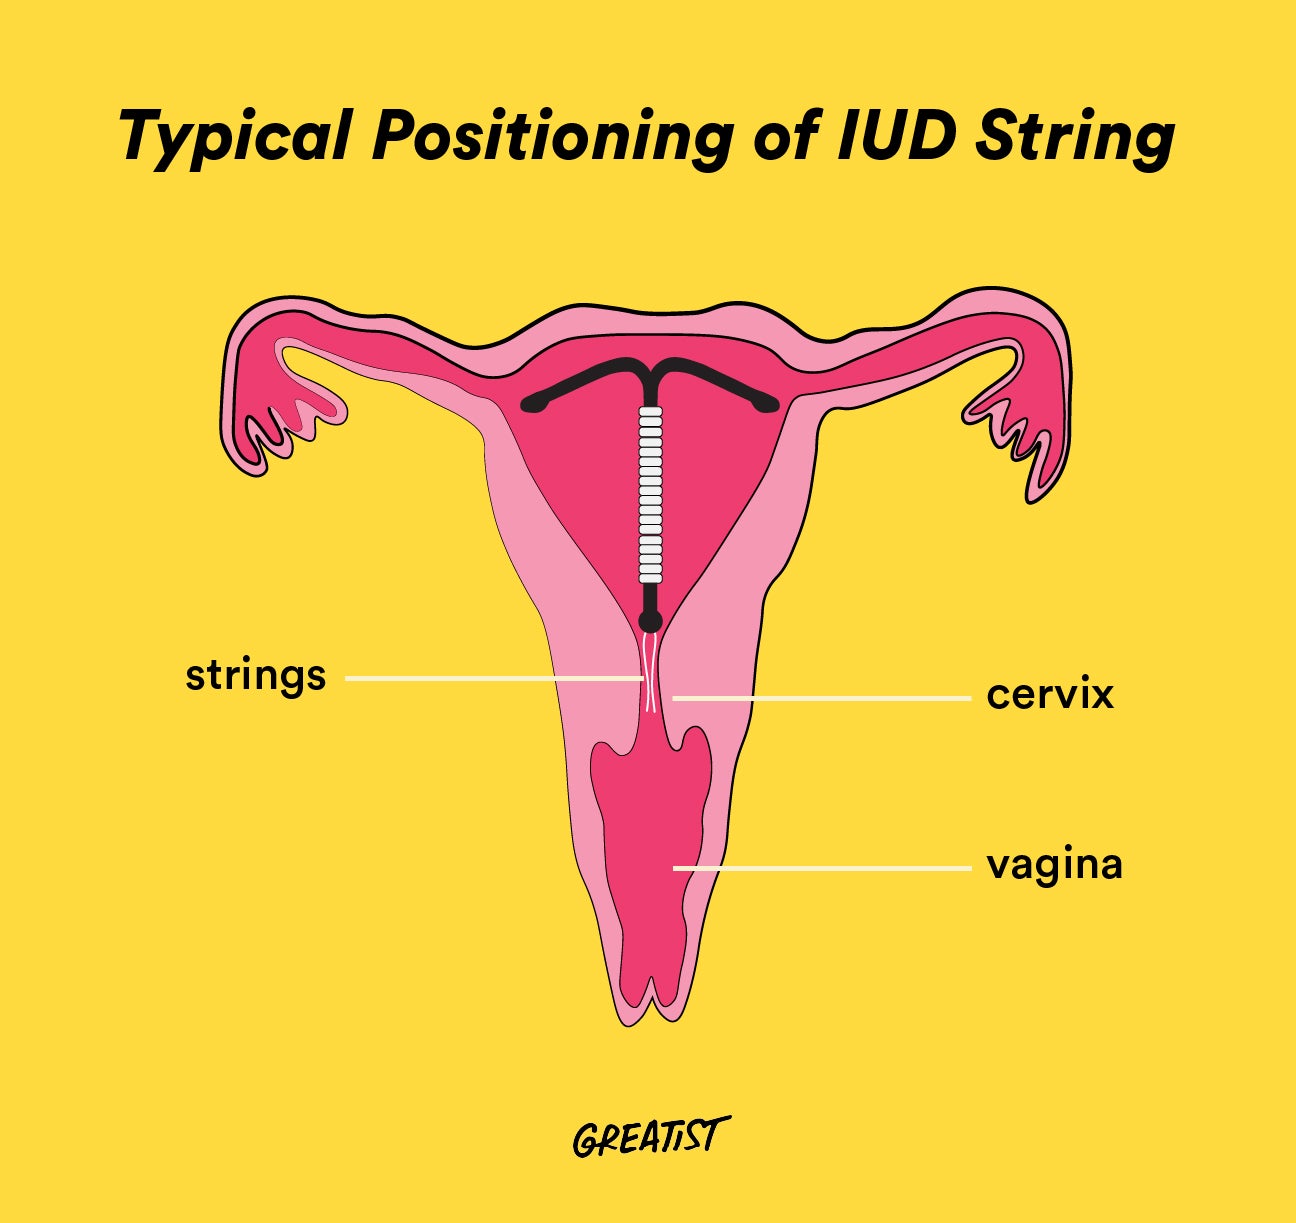 Feel iud strings can partner Sex With